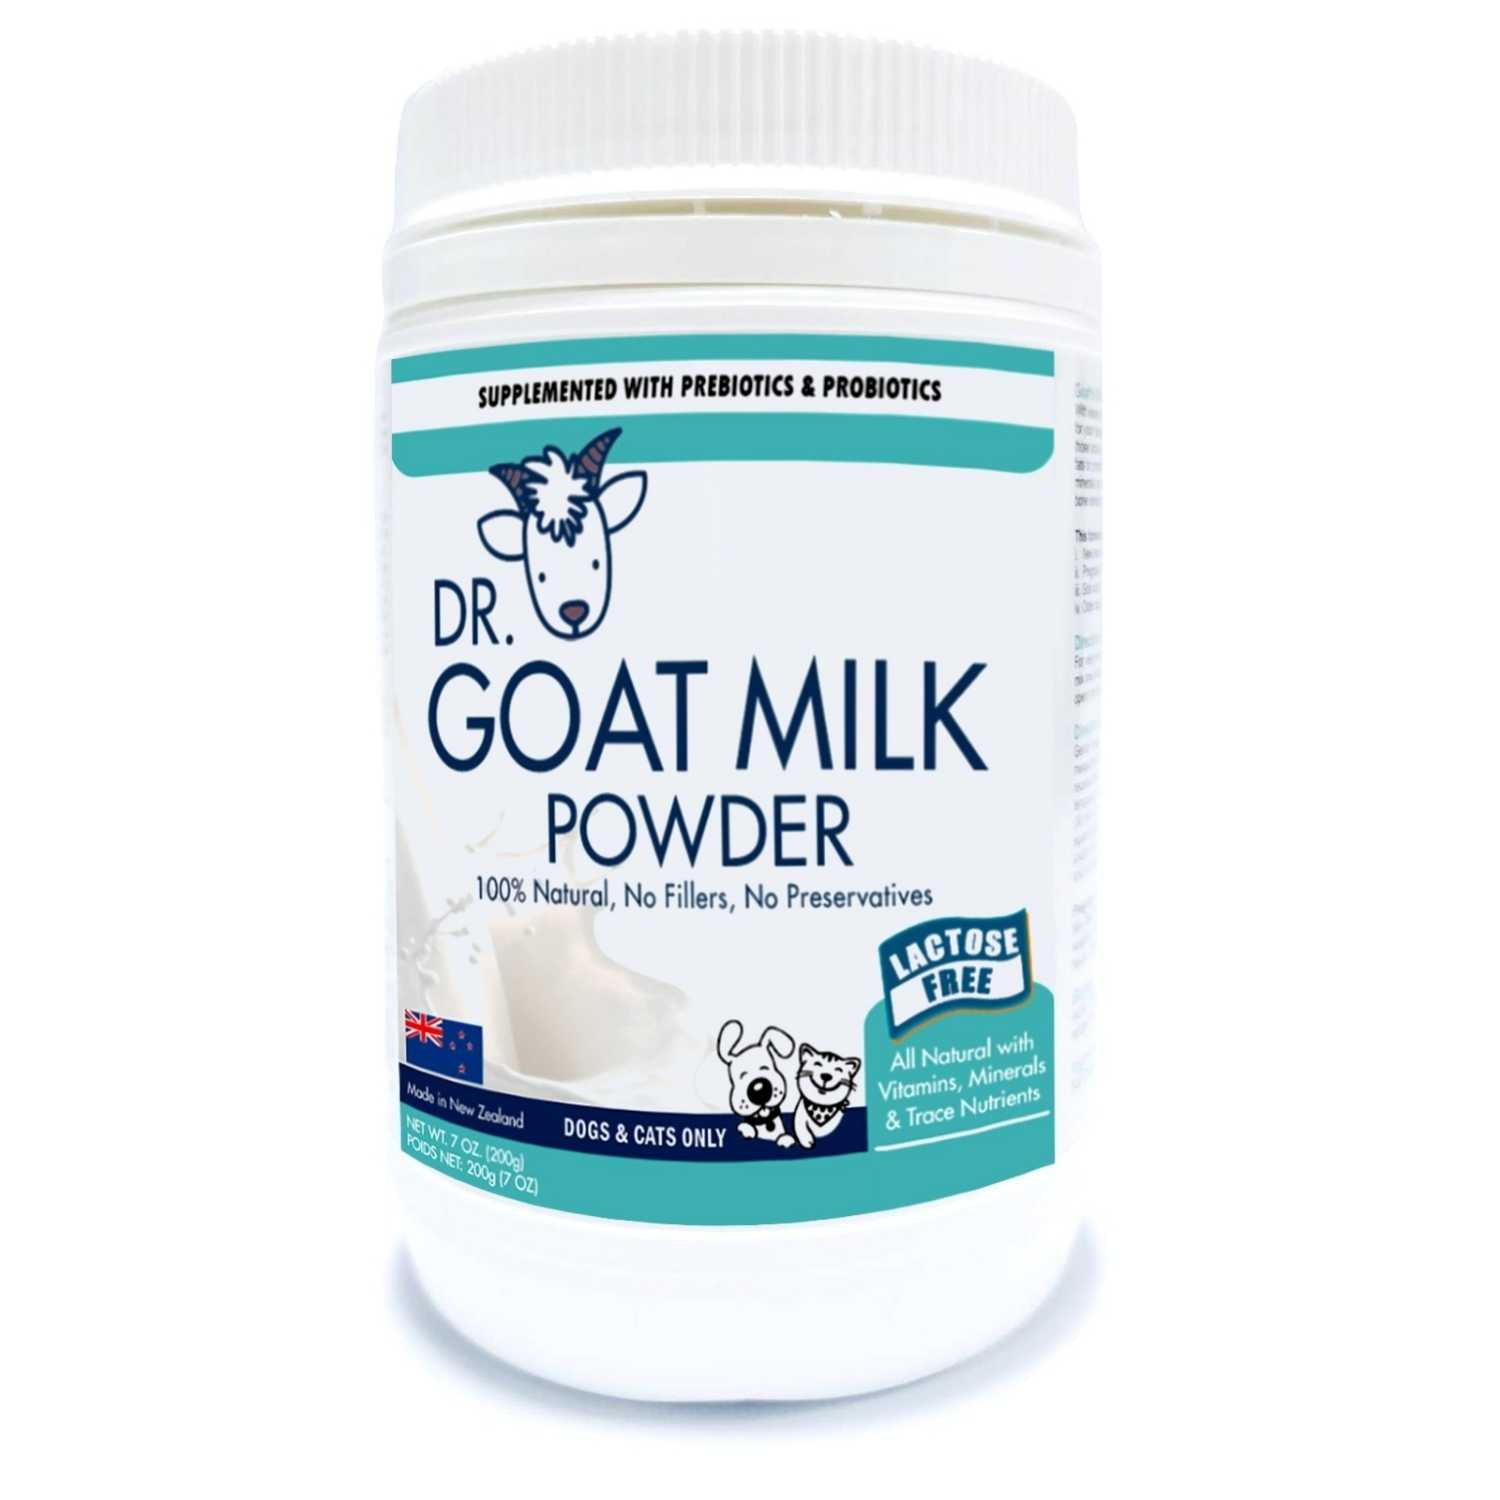 Dr. Goat Milk Powder Supplemented with Prebiotics & Probiotics for Dogs & Cats 200g